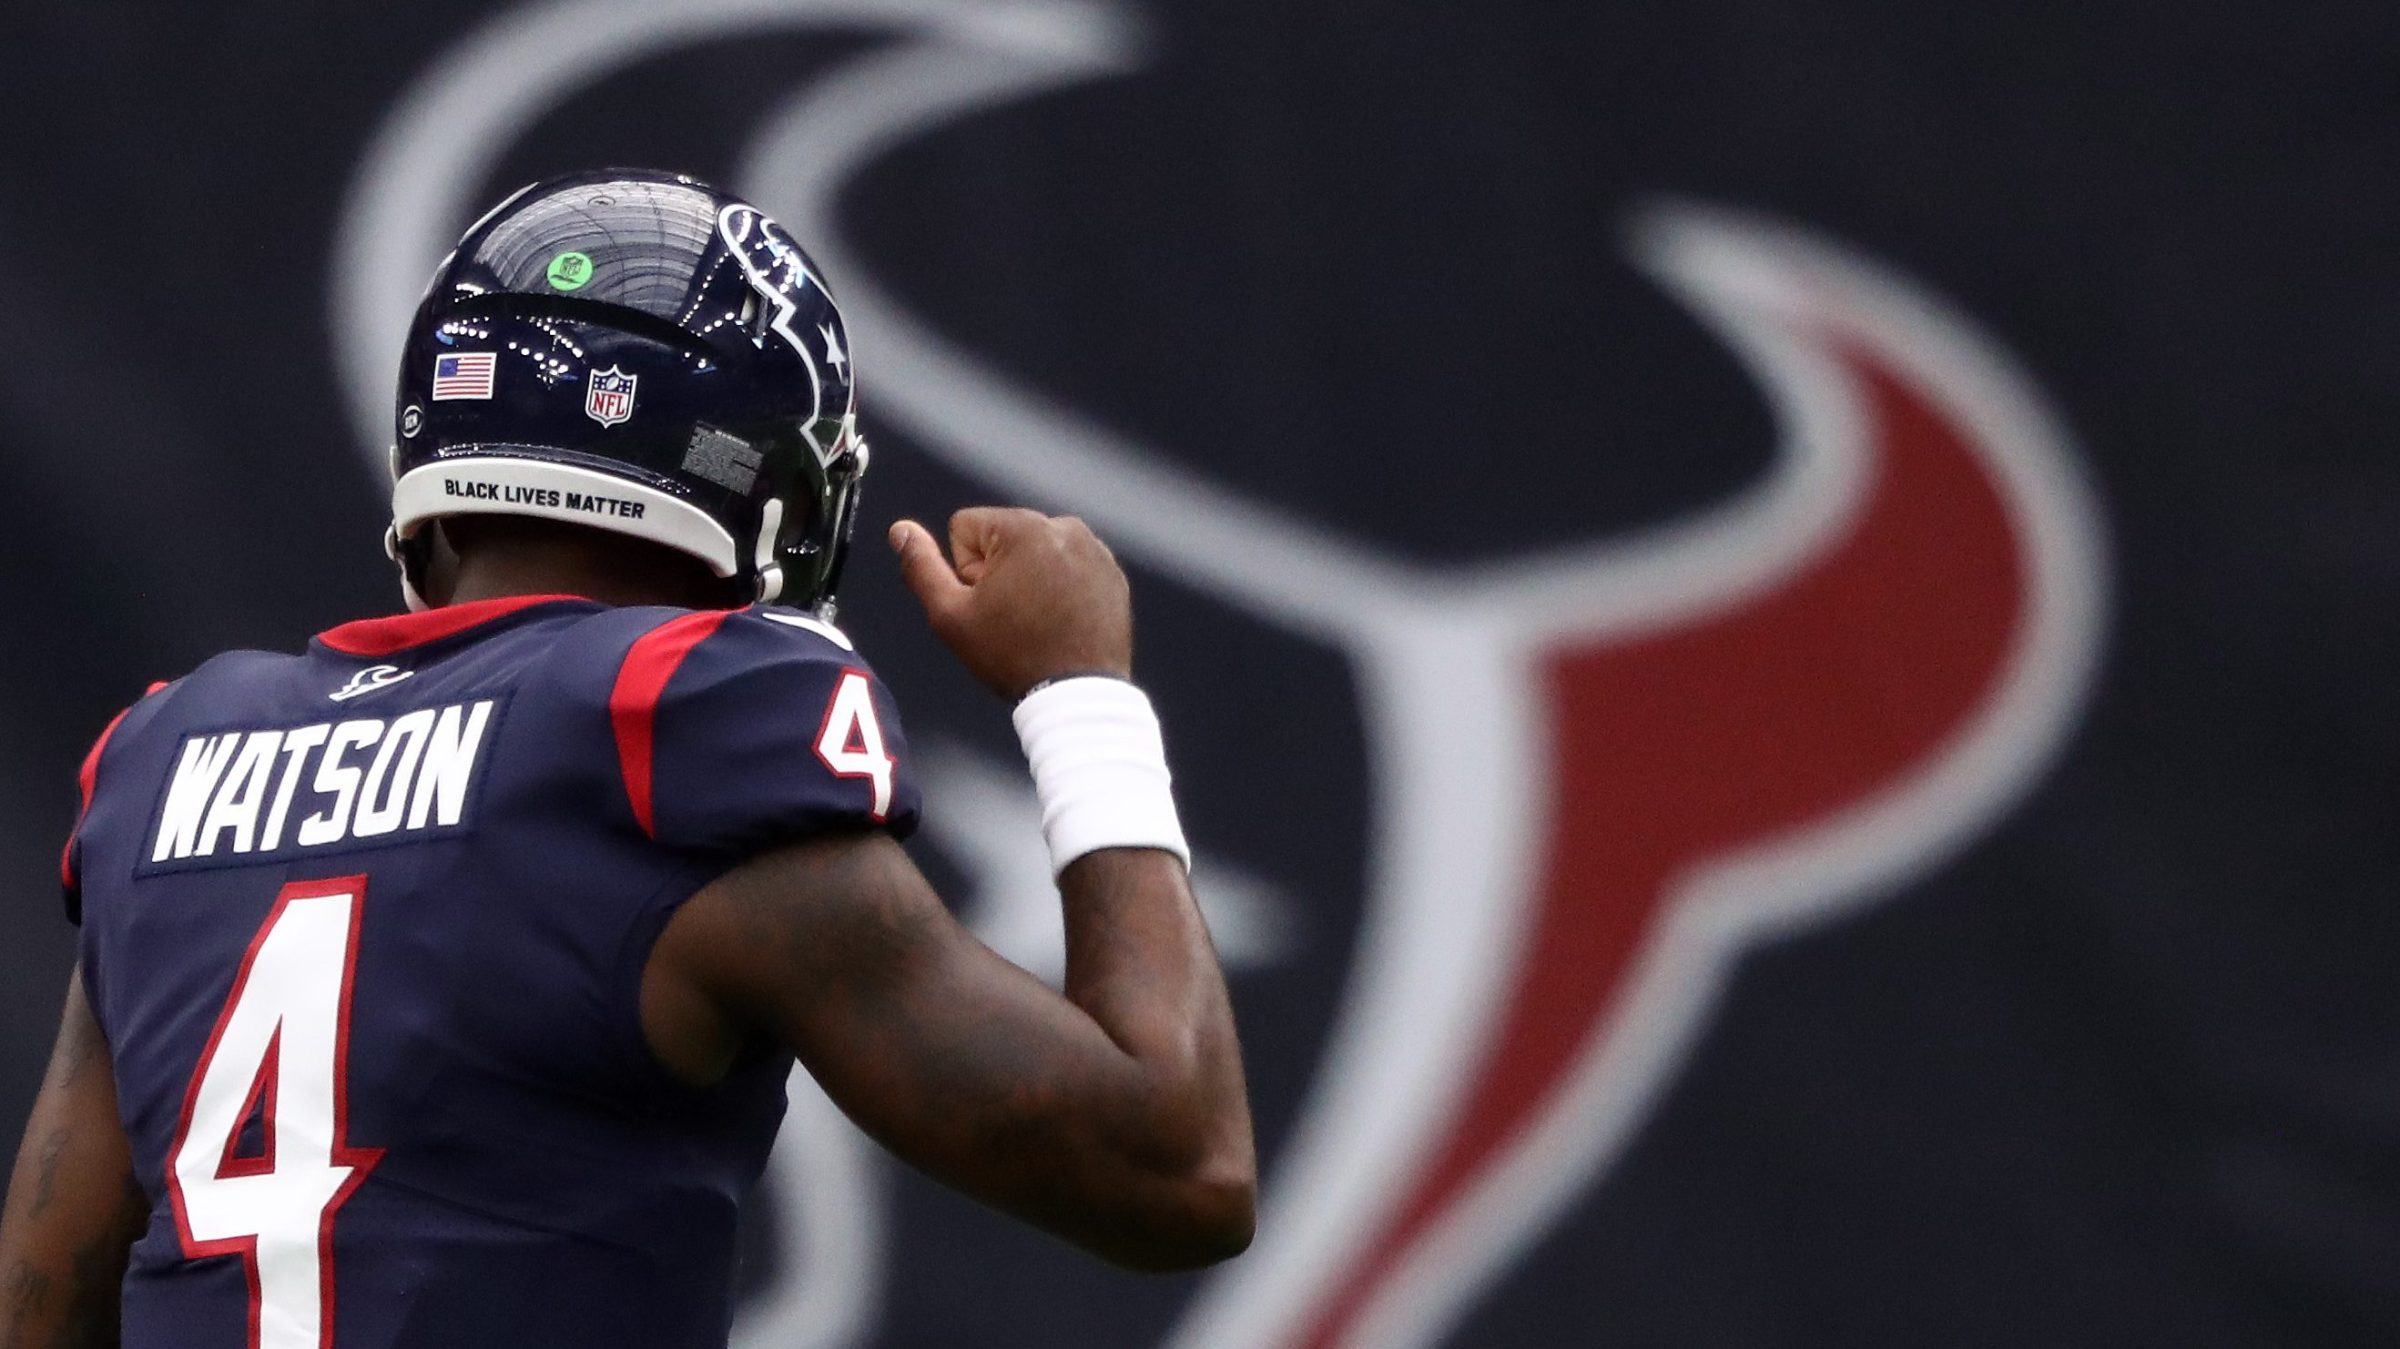 Deshaun Watson #4 of the Houston Texans celebrates a 30-14 win against the Jacksonville Jaguars at NRG Stadium on October 11, 2020 in Houston, Texas. His back is to the camera. What you see are his name across the back of his jersey and a giant Texans logo.